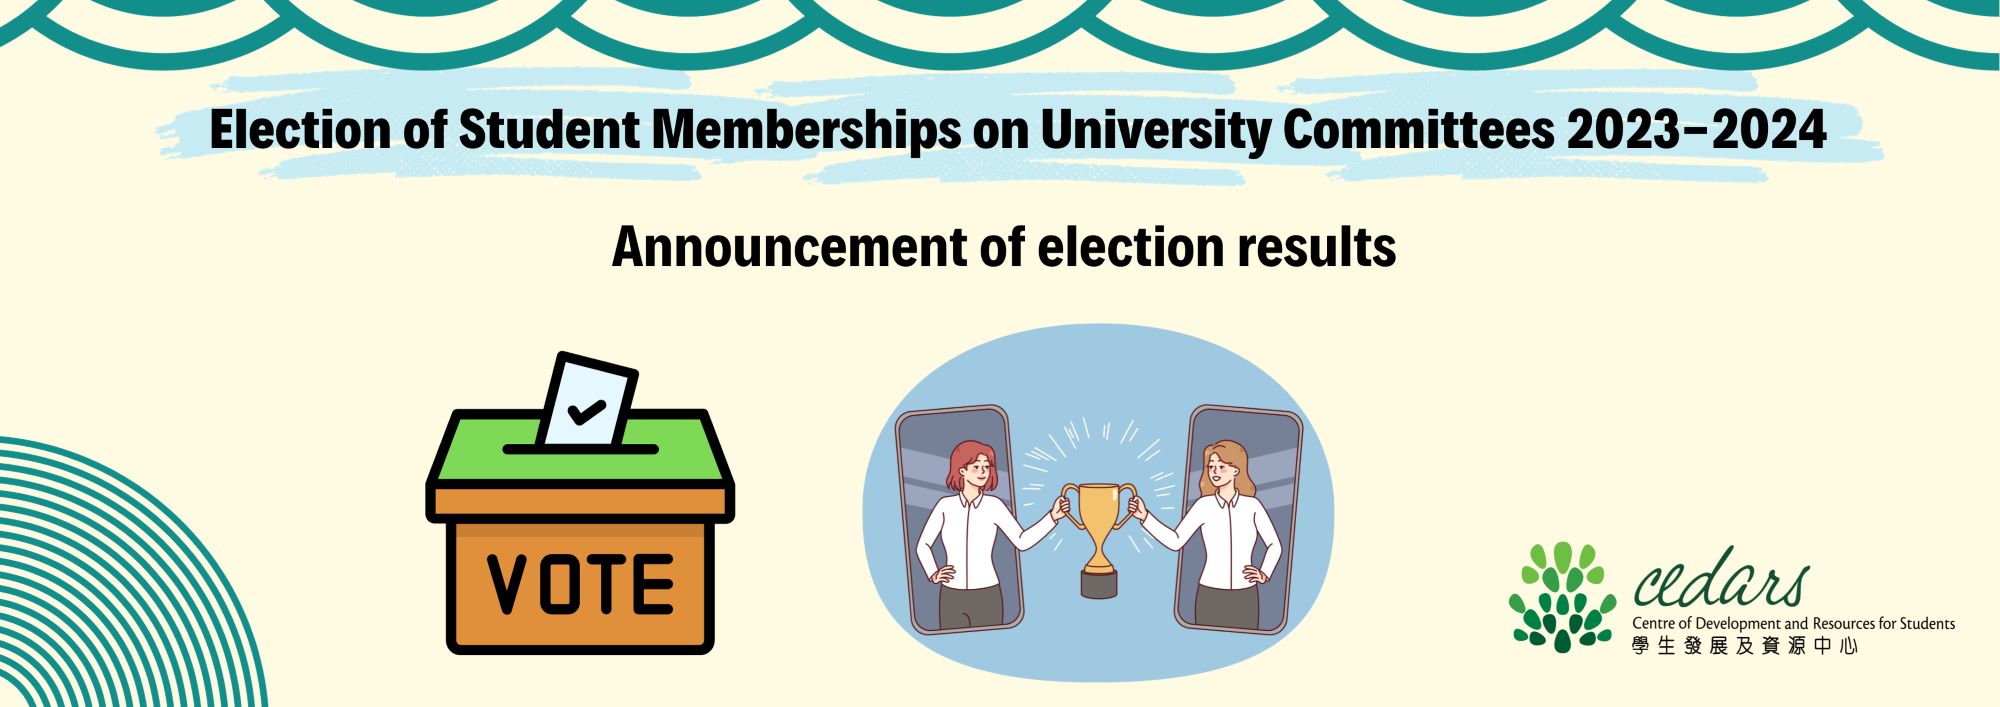  Announcement of Election Results: Election of Student Memberships on University Committees 2023-2024